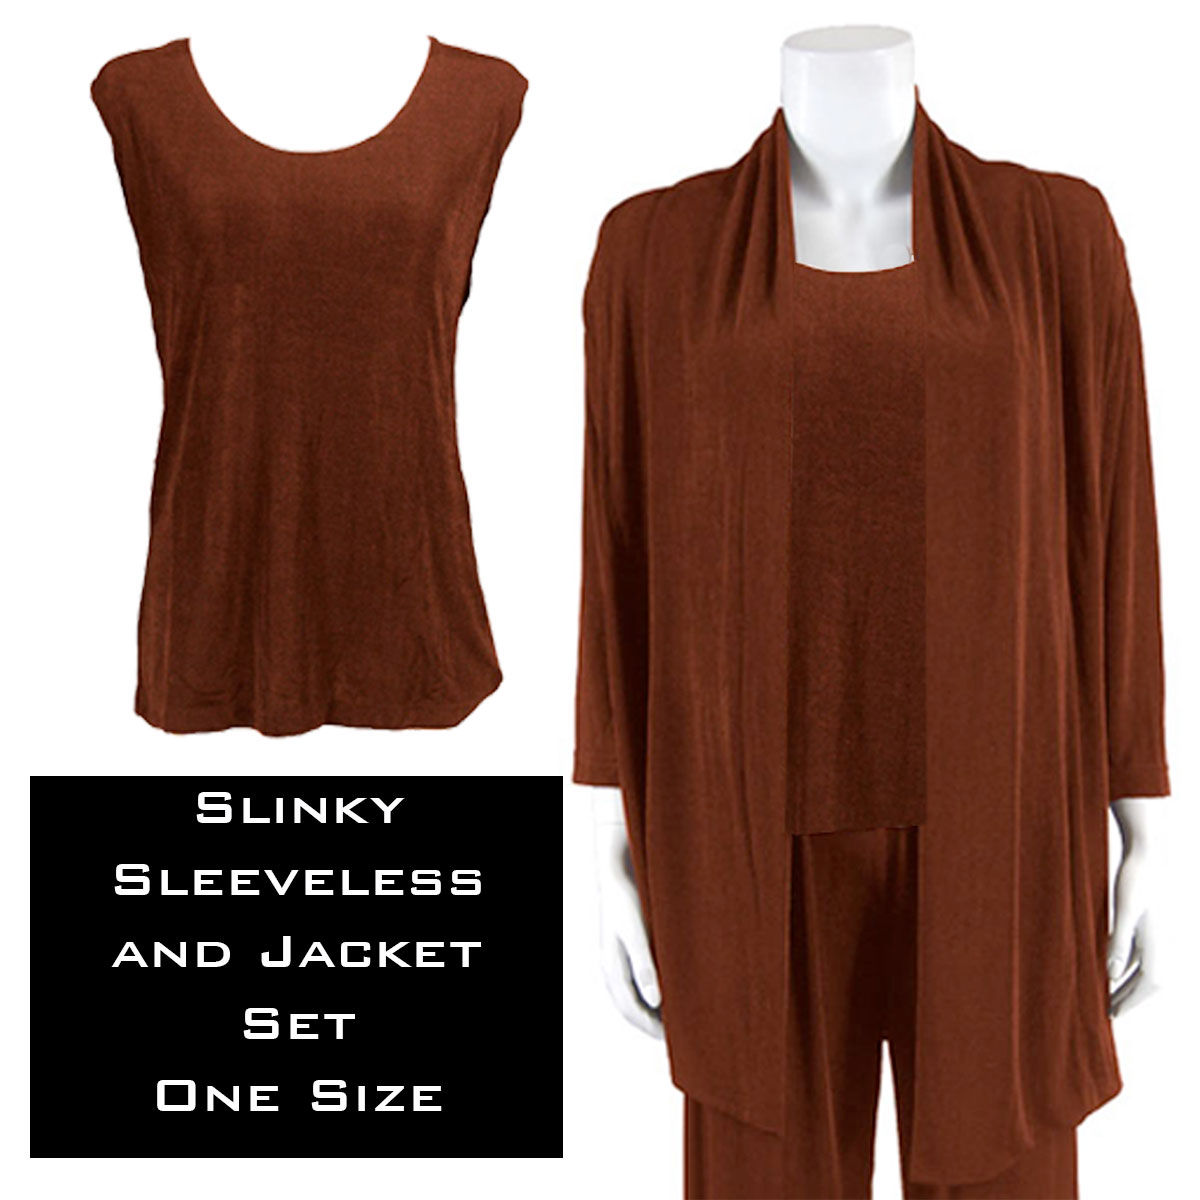 3432 - Slinky Jacket Set  BROWN - One Size Fits Most